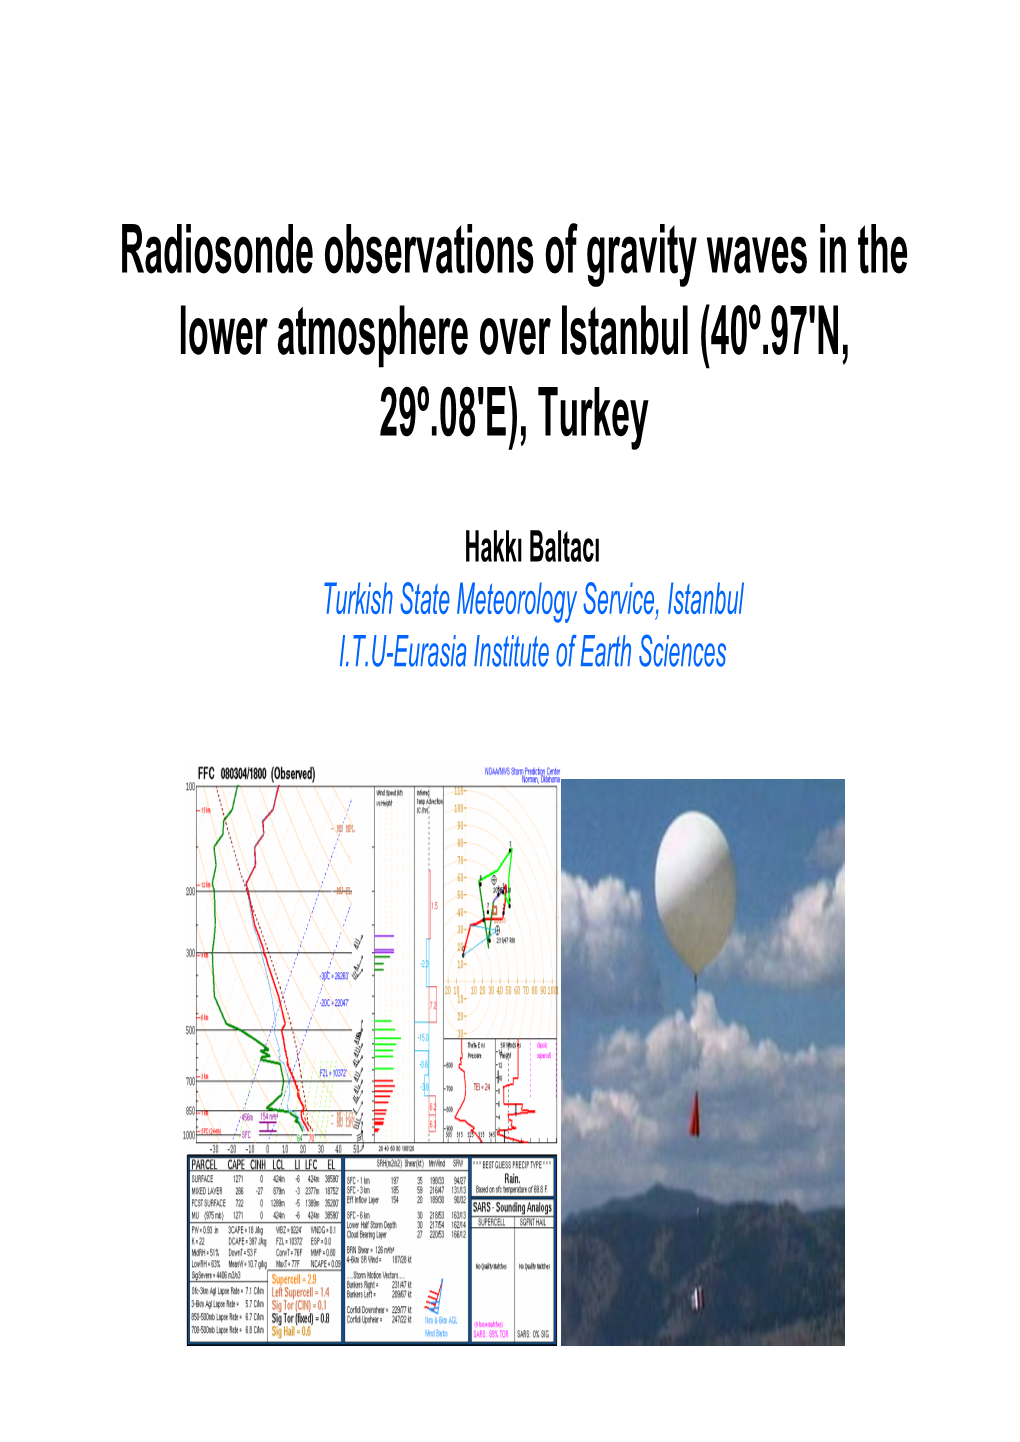 Radiosonde Observations of Gravity Waves in the Lower Atmosphere Over Istanbul (40º.97'N, 29º.08'E), Turkey